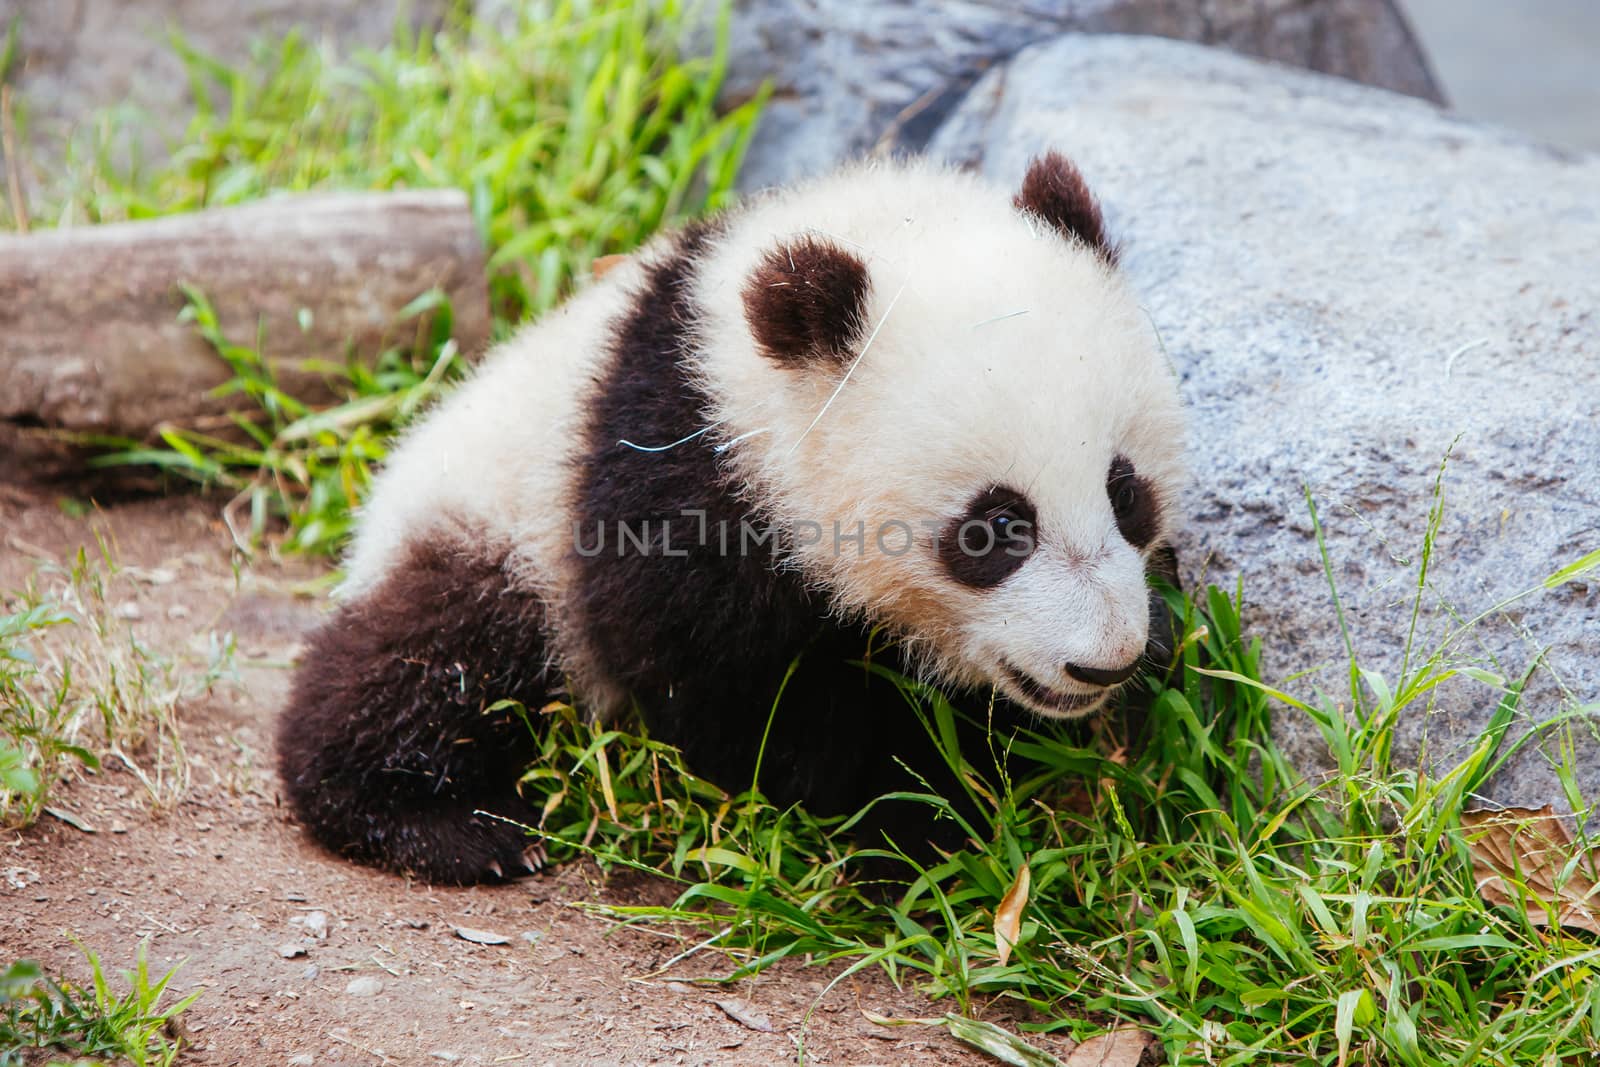 A baby panda walks during the day in San Diego, California, USA